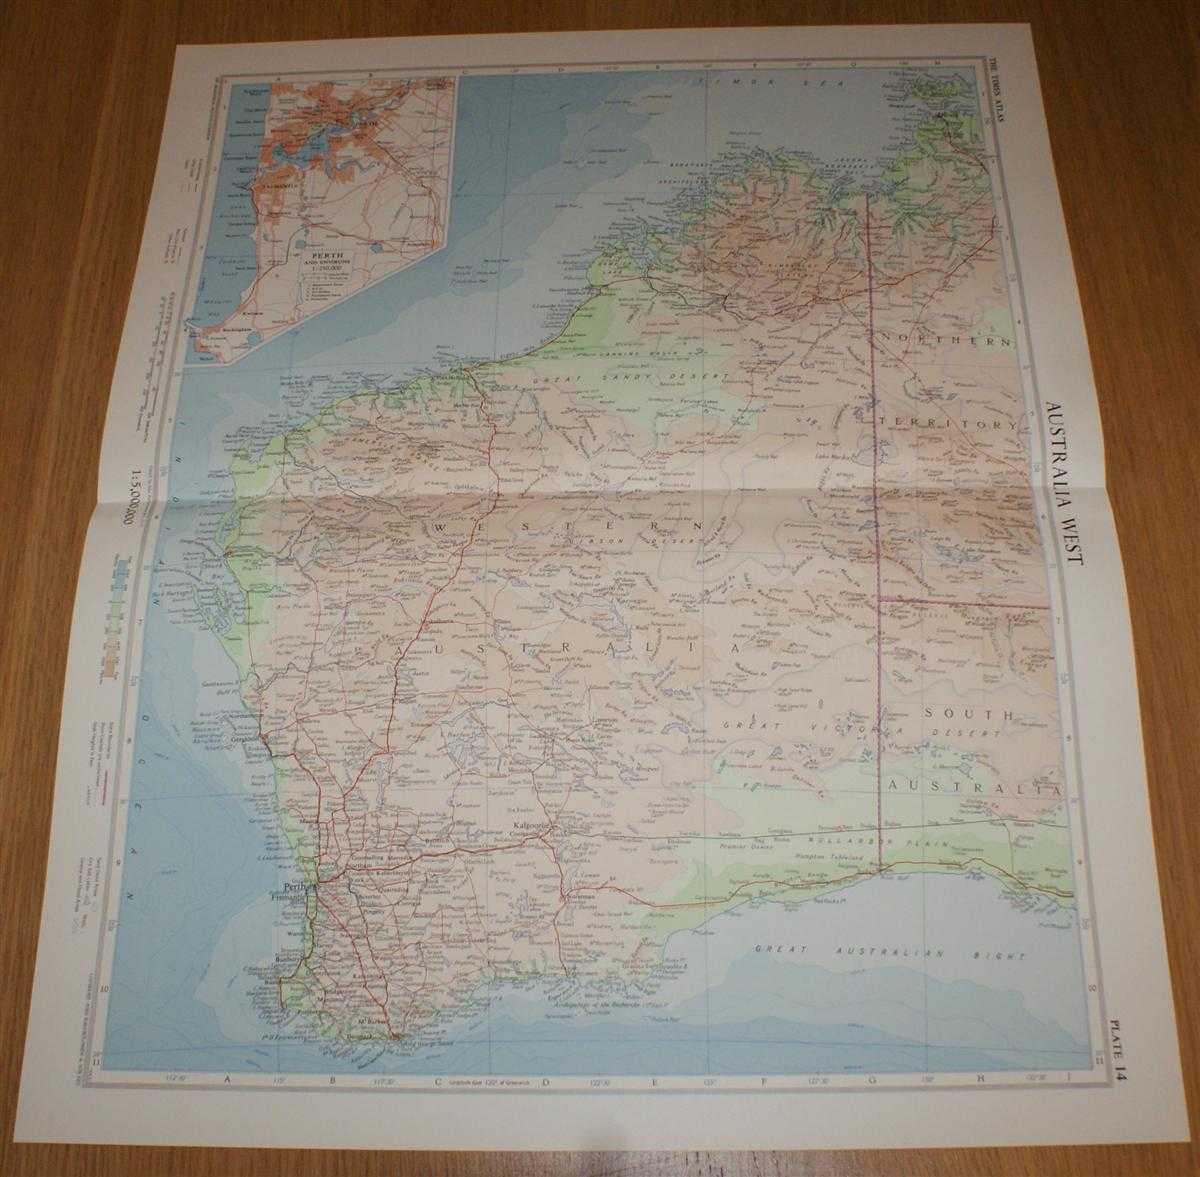 John Bartholomew - Map of 'Australia West' - Plate 14 disbound from 1958 Mid-Century Times Atlas of the World, covering Western Australia with inset plan of Perth